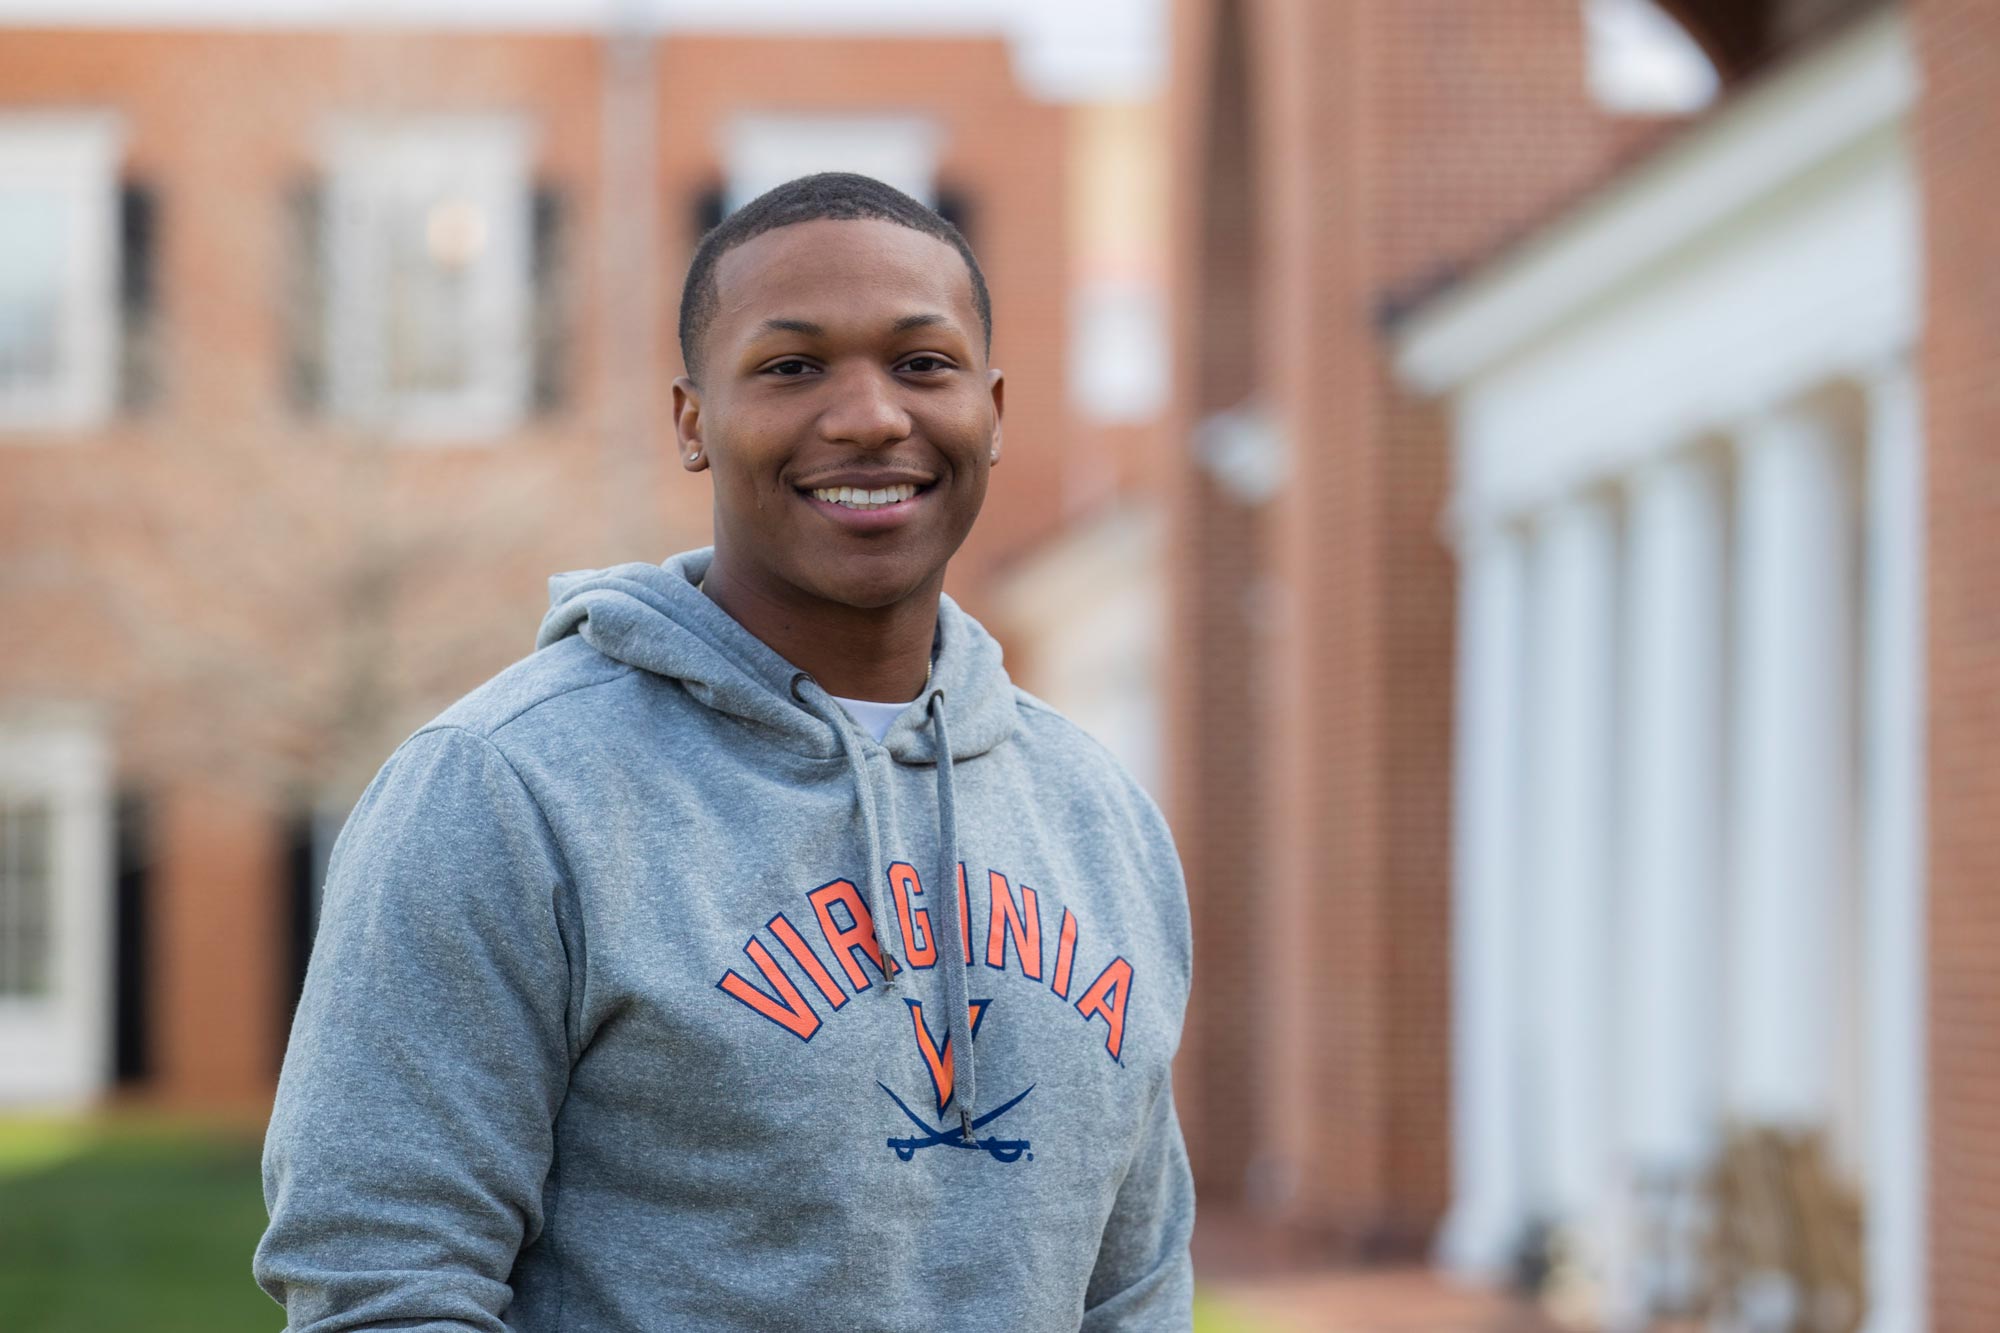 Antonio Brodie Jr. wears a gray sweatshirt with the Virginia Cavaliers logo and smiles at the camera